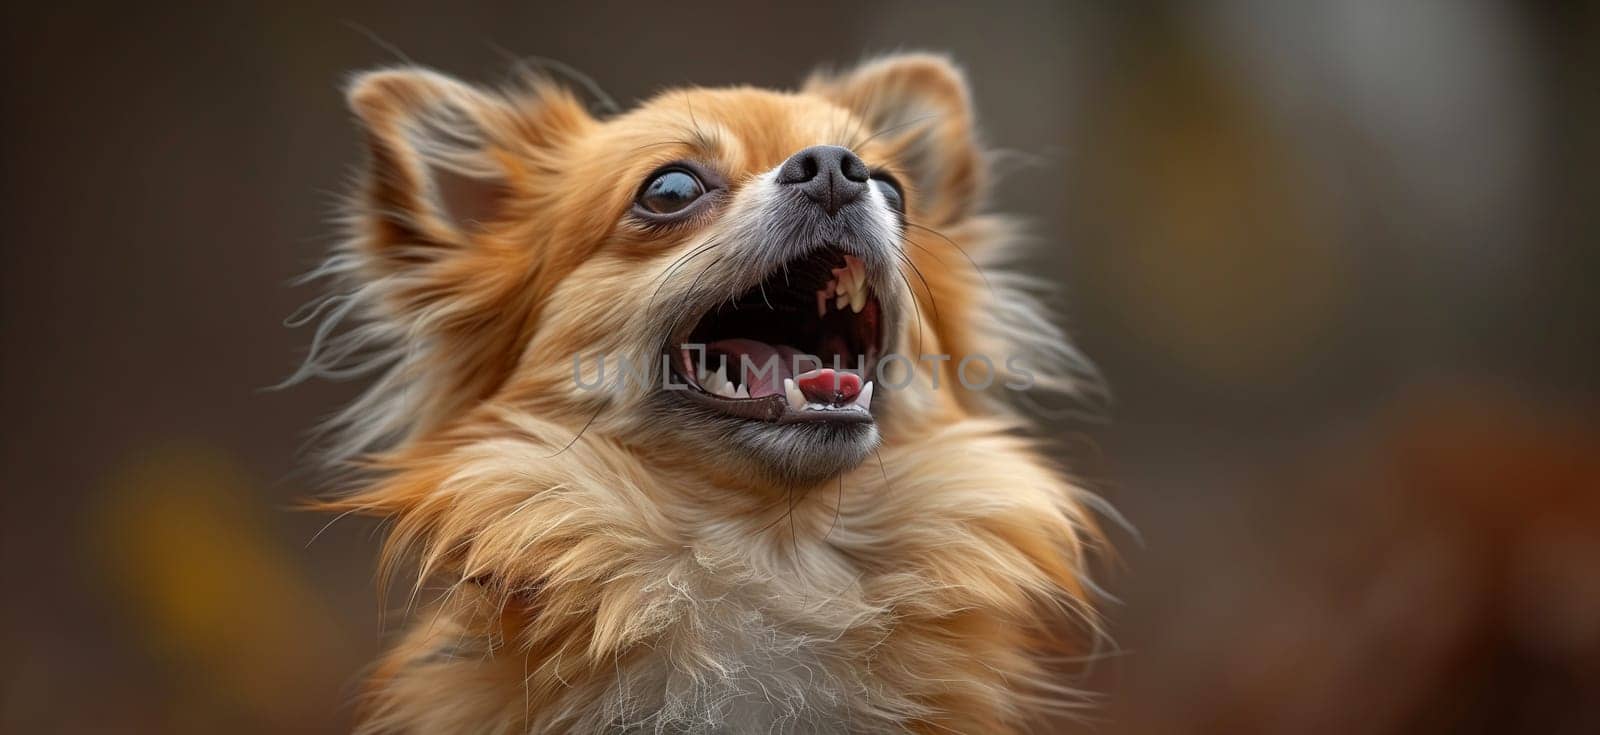 A close up of a Chihuahua, a small dog breed known for its open mouth, fawn color, whiskers, and tiny fangs. Considered a companion dog in the Sporting Group category